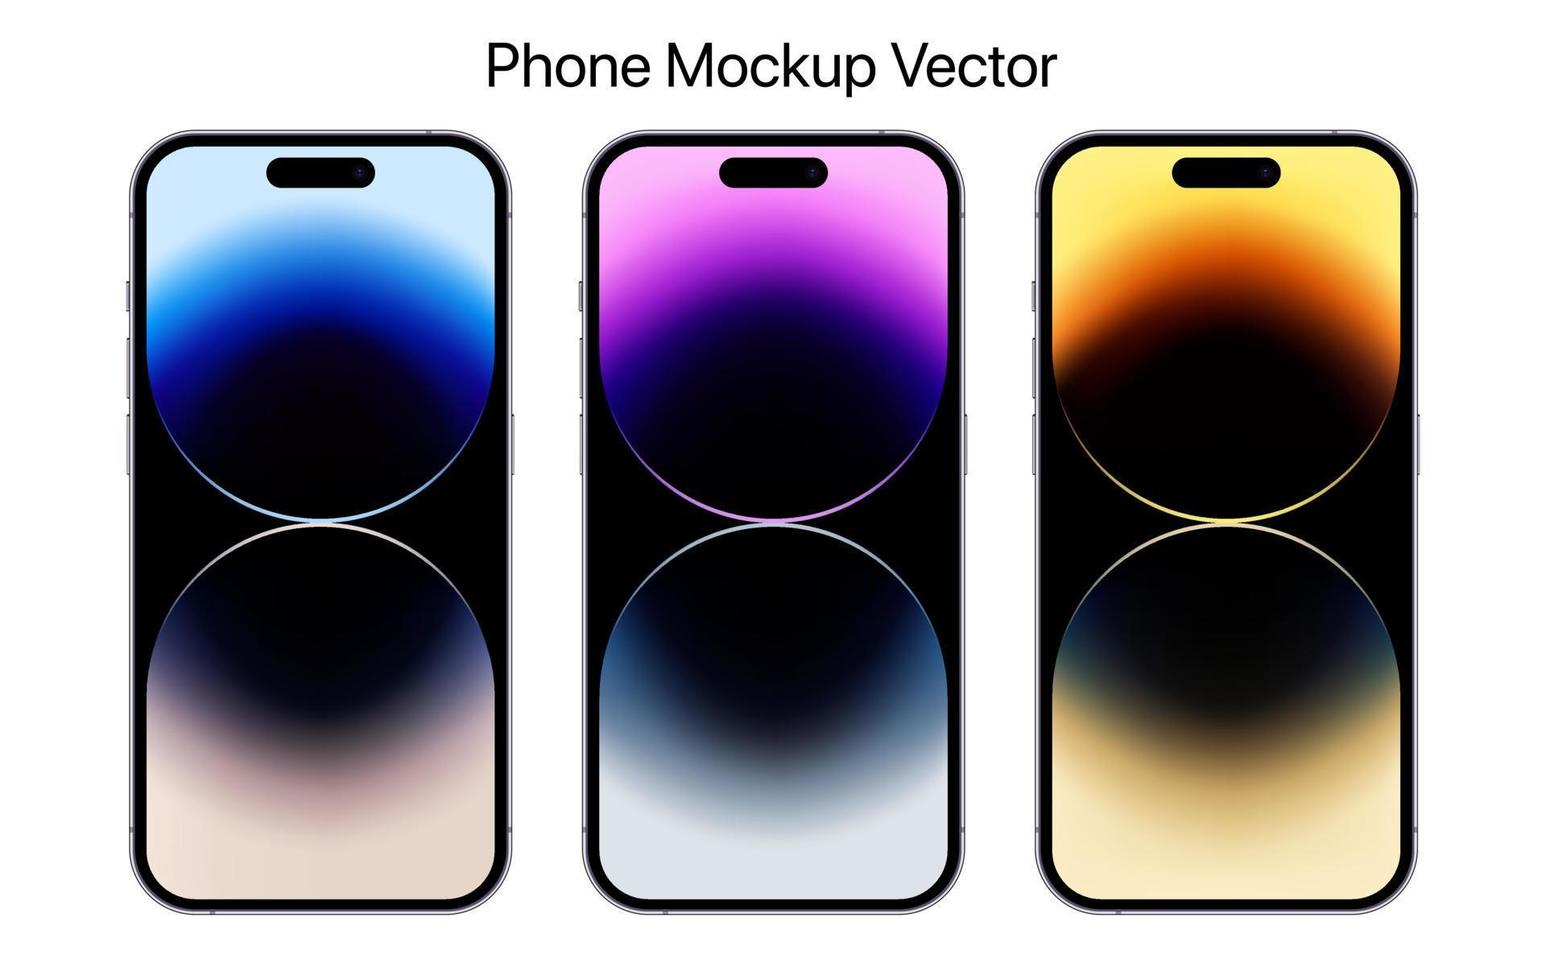 Phone pro mockup smartphone mobile vector illustration isolated on background with a blank screen